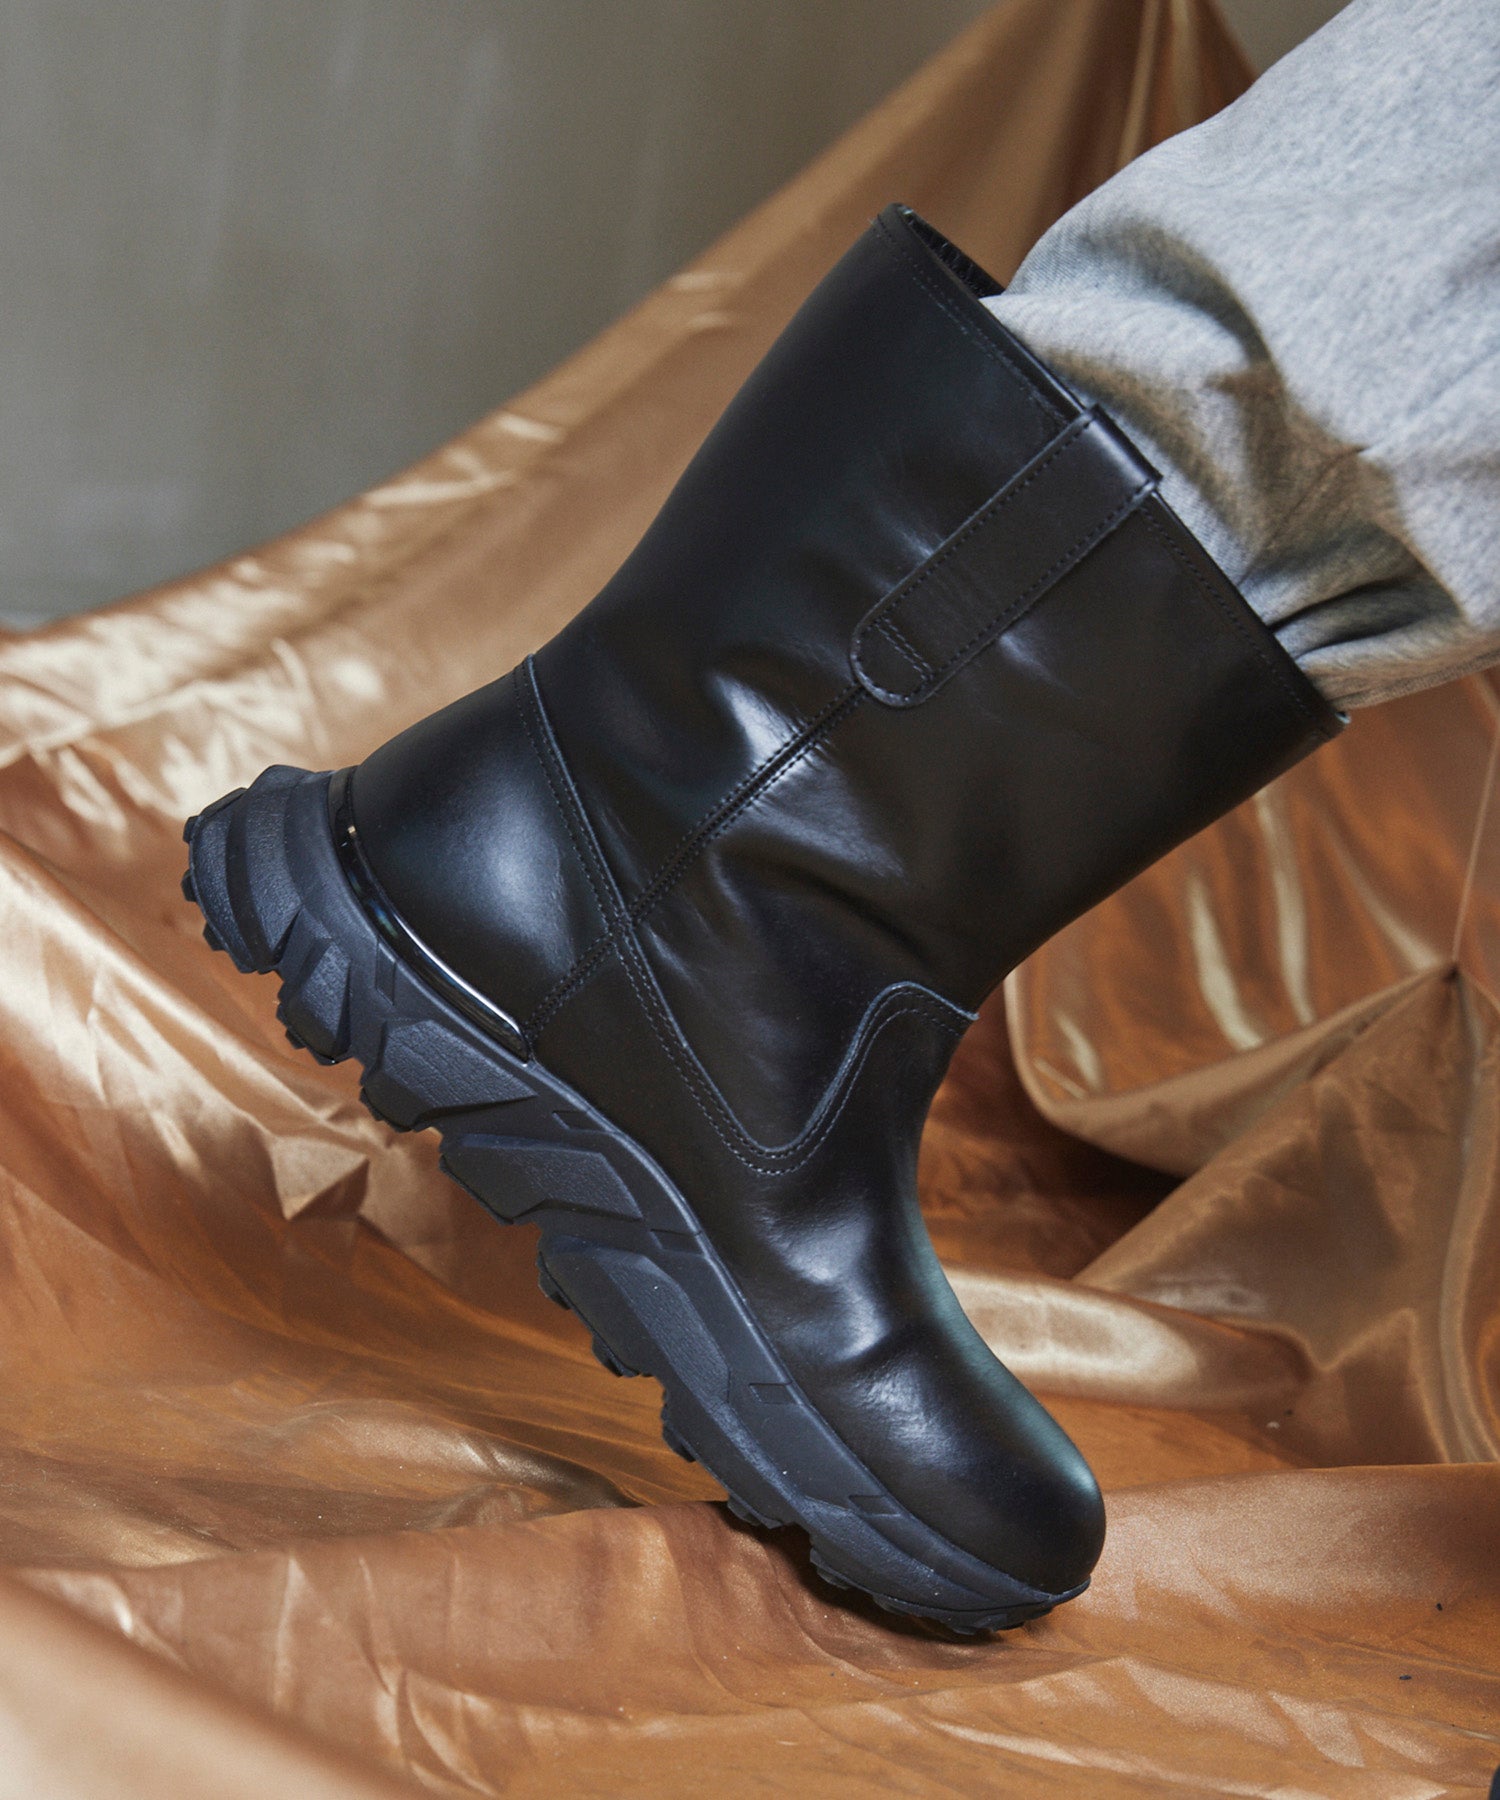 [Special SHOES FACTORY COLLABORATION] VIBRAM SOLE PECOS BOOTS MADE in Tokyo